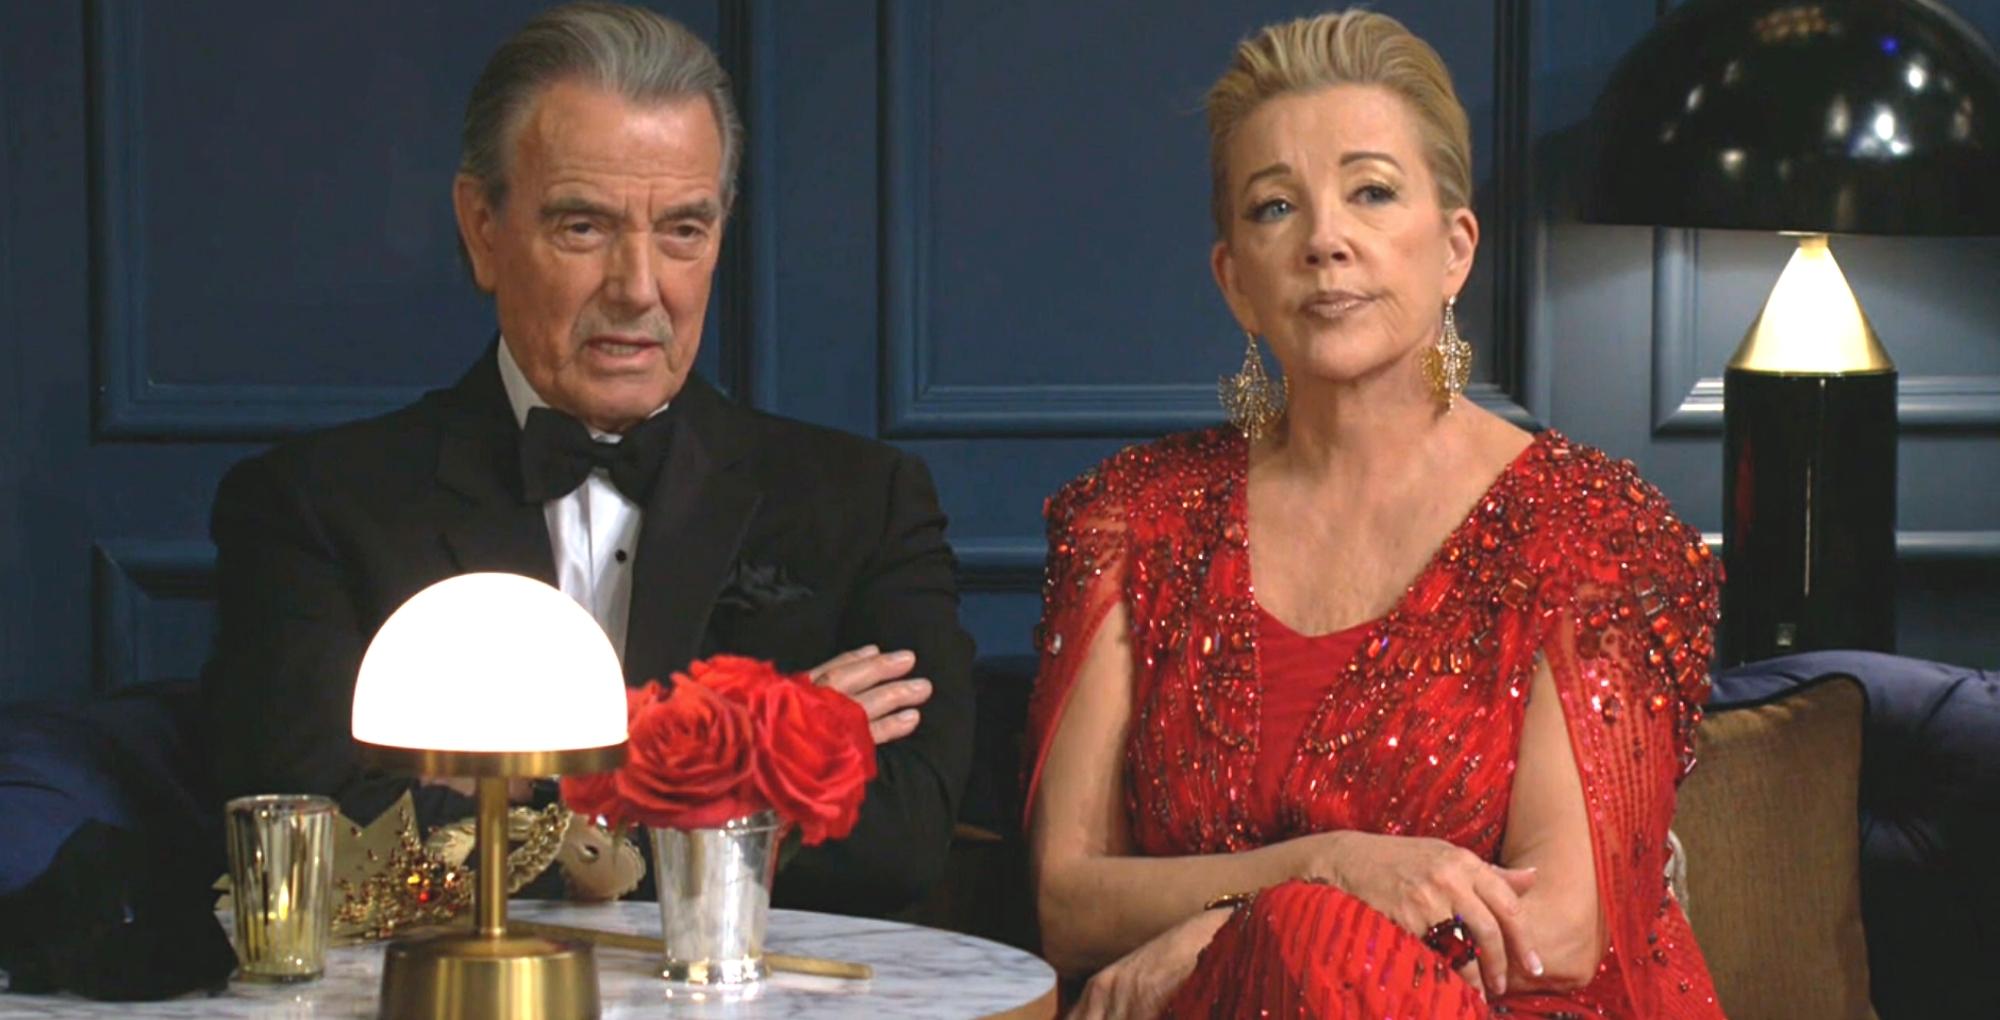 the young and the restless recap for march 29, 2023 has victor and nikki at the gala and she's mad